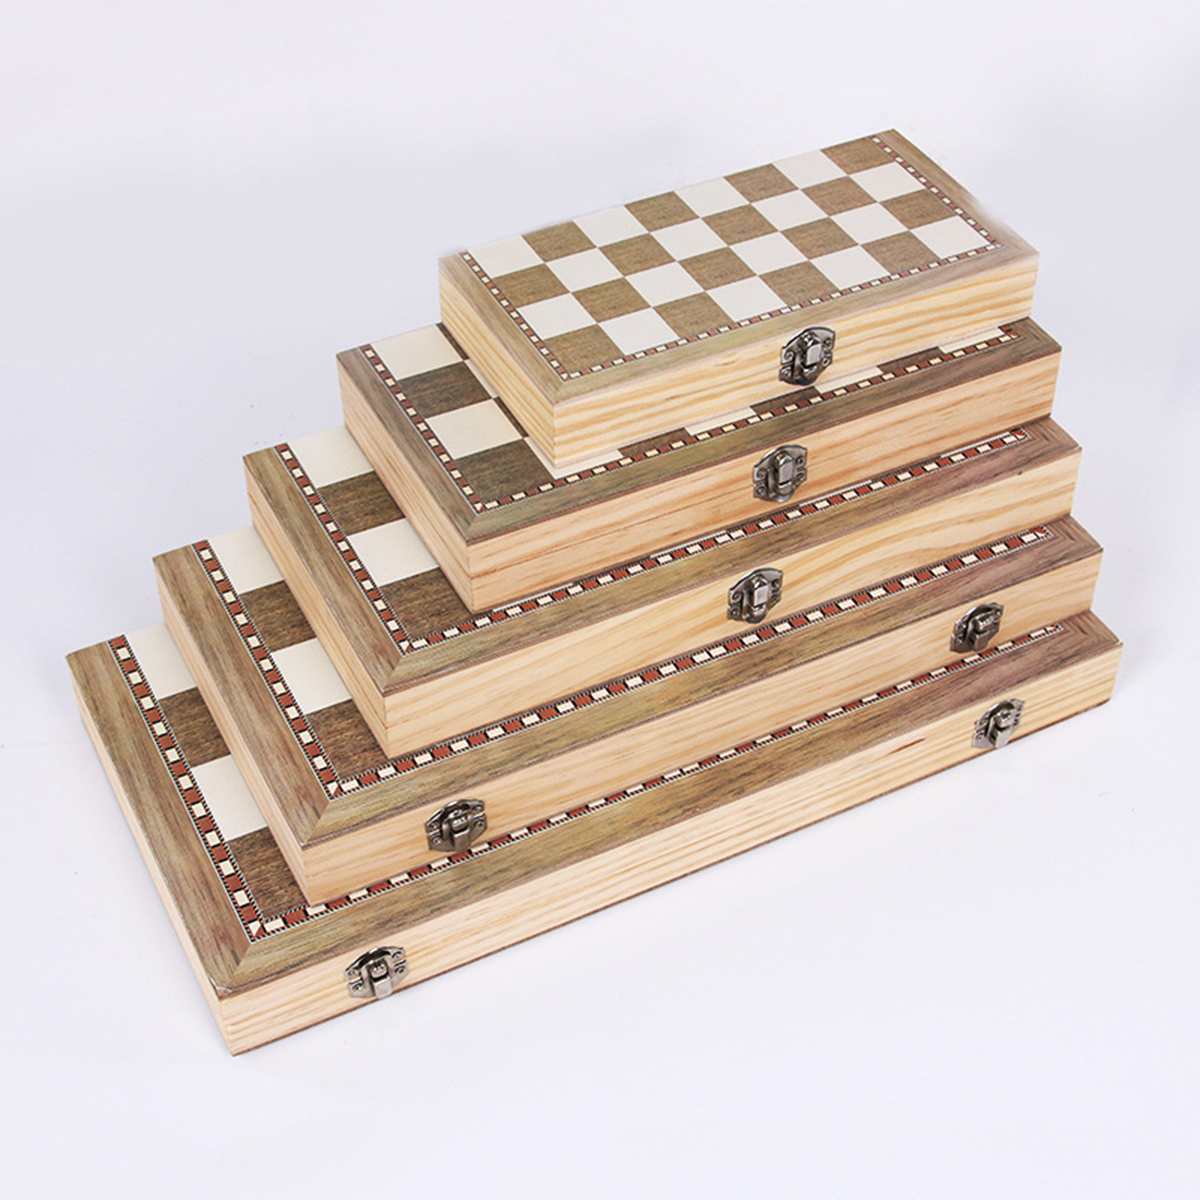 Board game toy kit foldable wooden chess set travel game chess backgammon checkers toy children chess entertainment